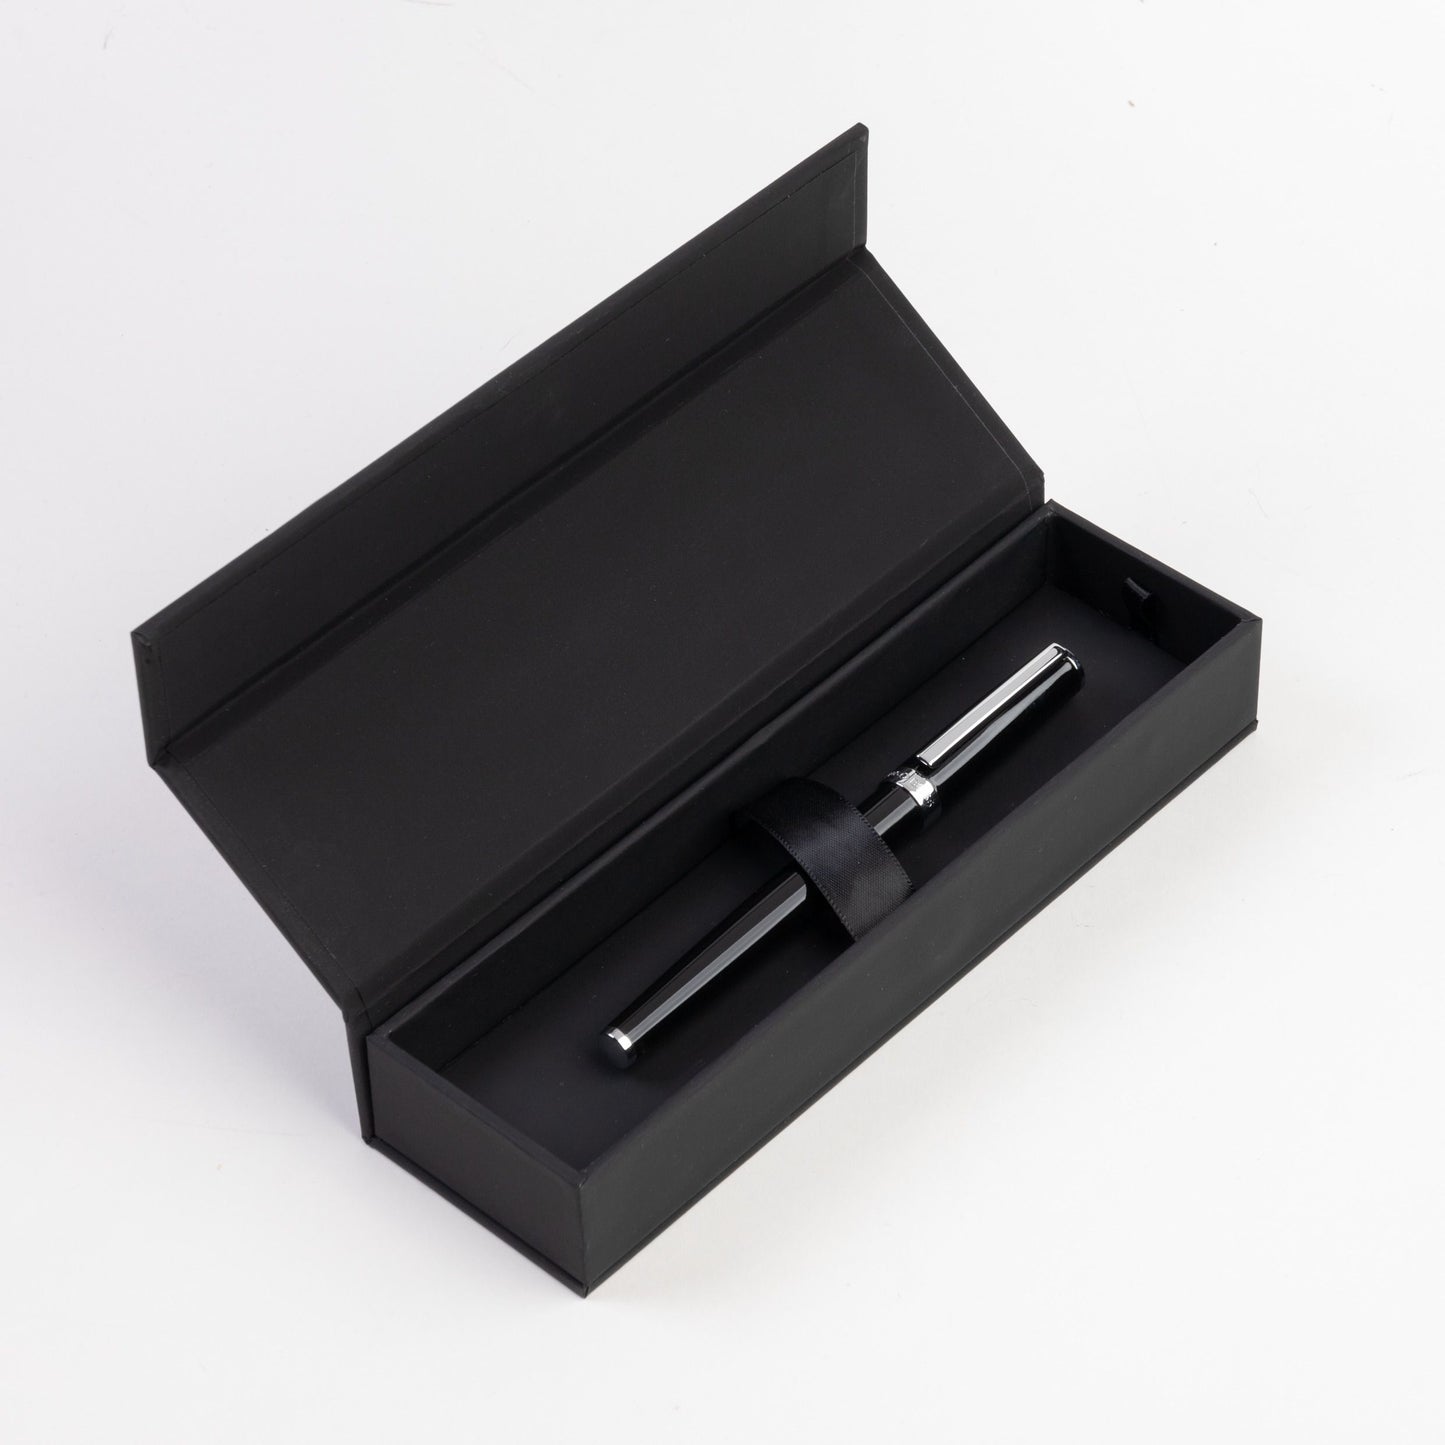 Hugo Boss - Rollerball Pen Gear Icon Black - Product Code: HSN2545A